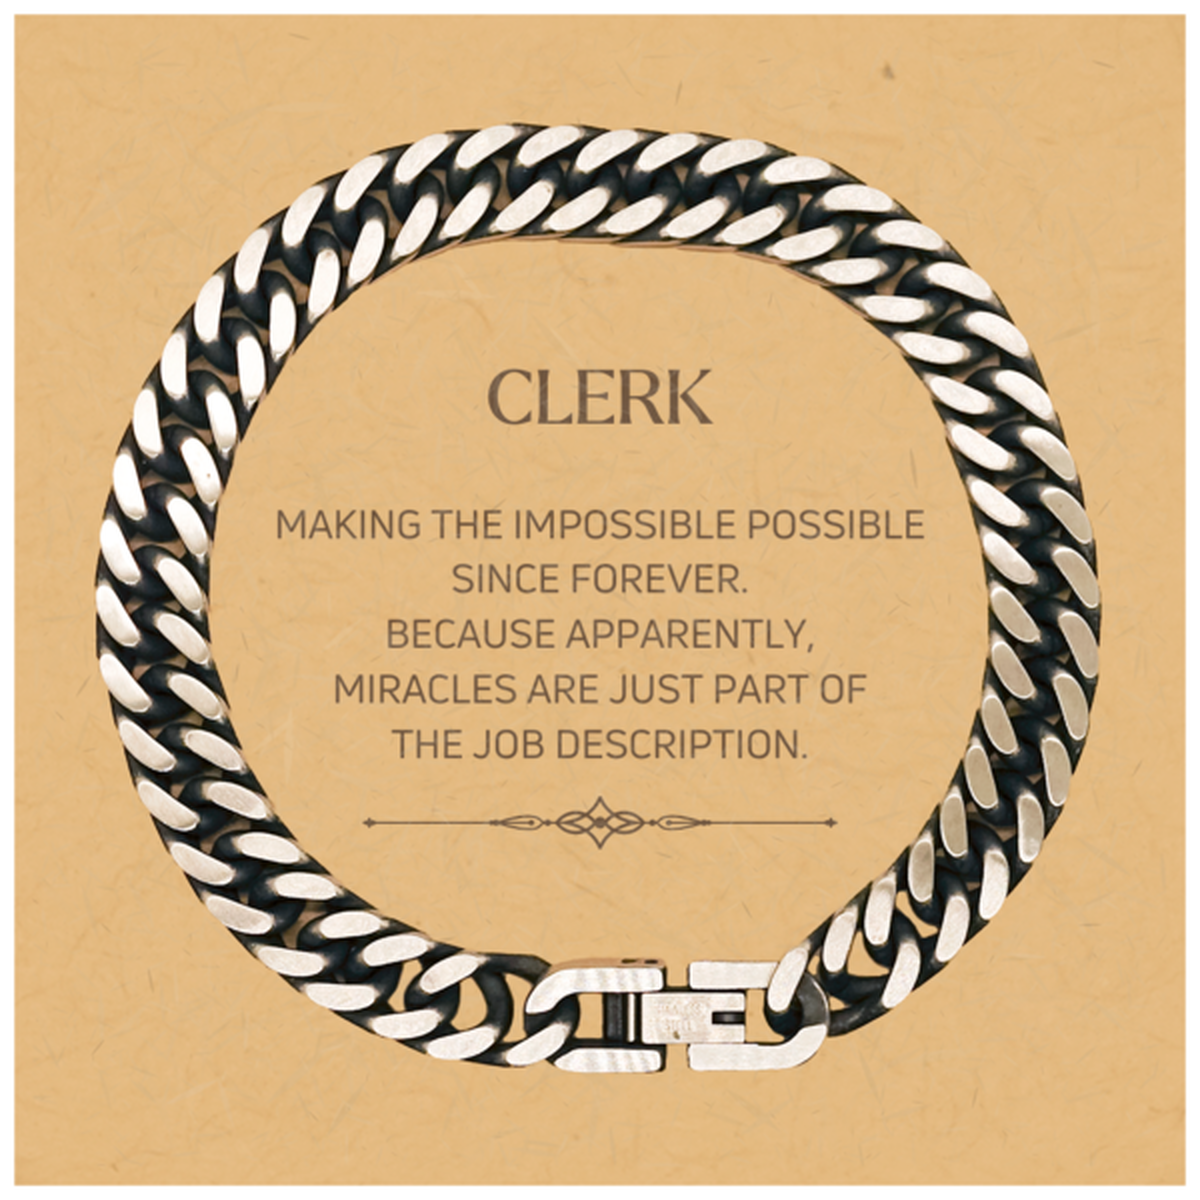 Funny Clerk Gifts, Miracles are just part of the job description, Inspirational Birthday Christmas Cuban Link Chain Bracelet For Clerk, Men, Women, Coworkers, Friends, Boss